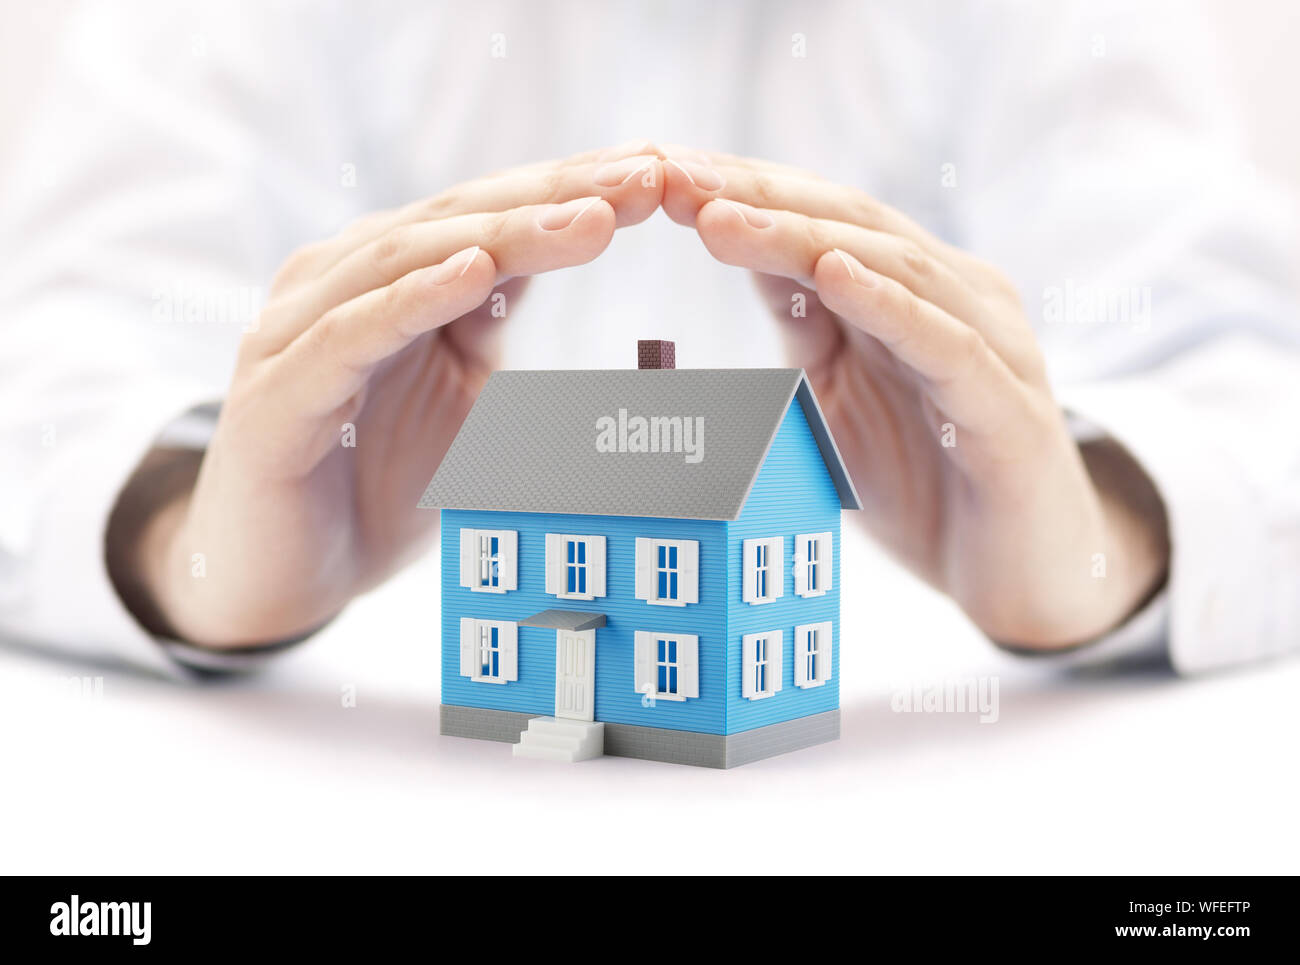 Small blue house covered by hands Stock Photo